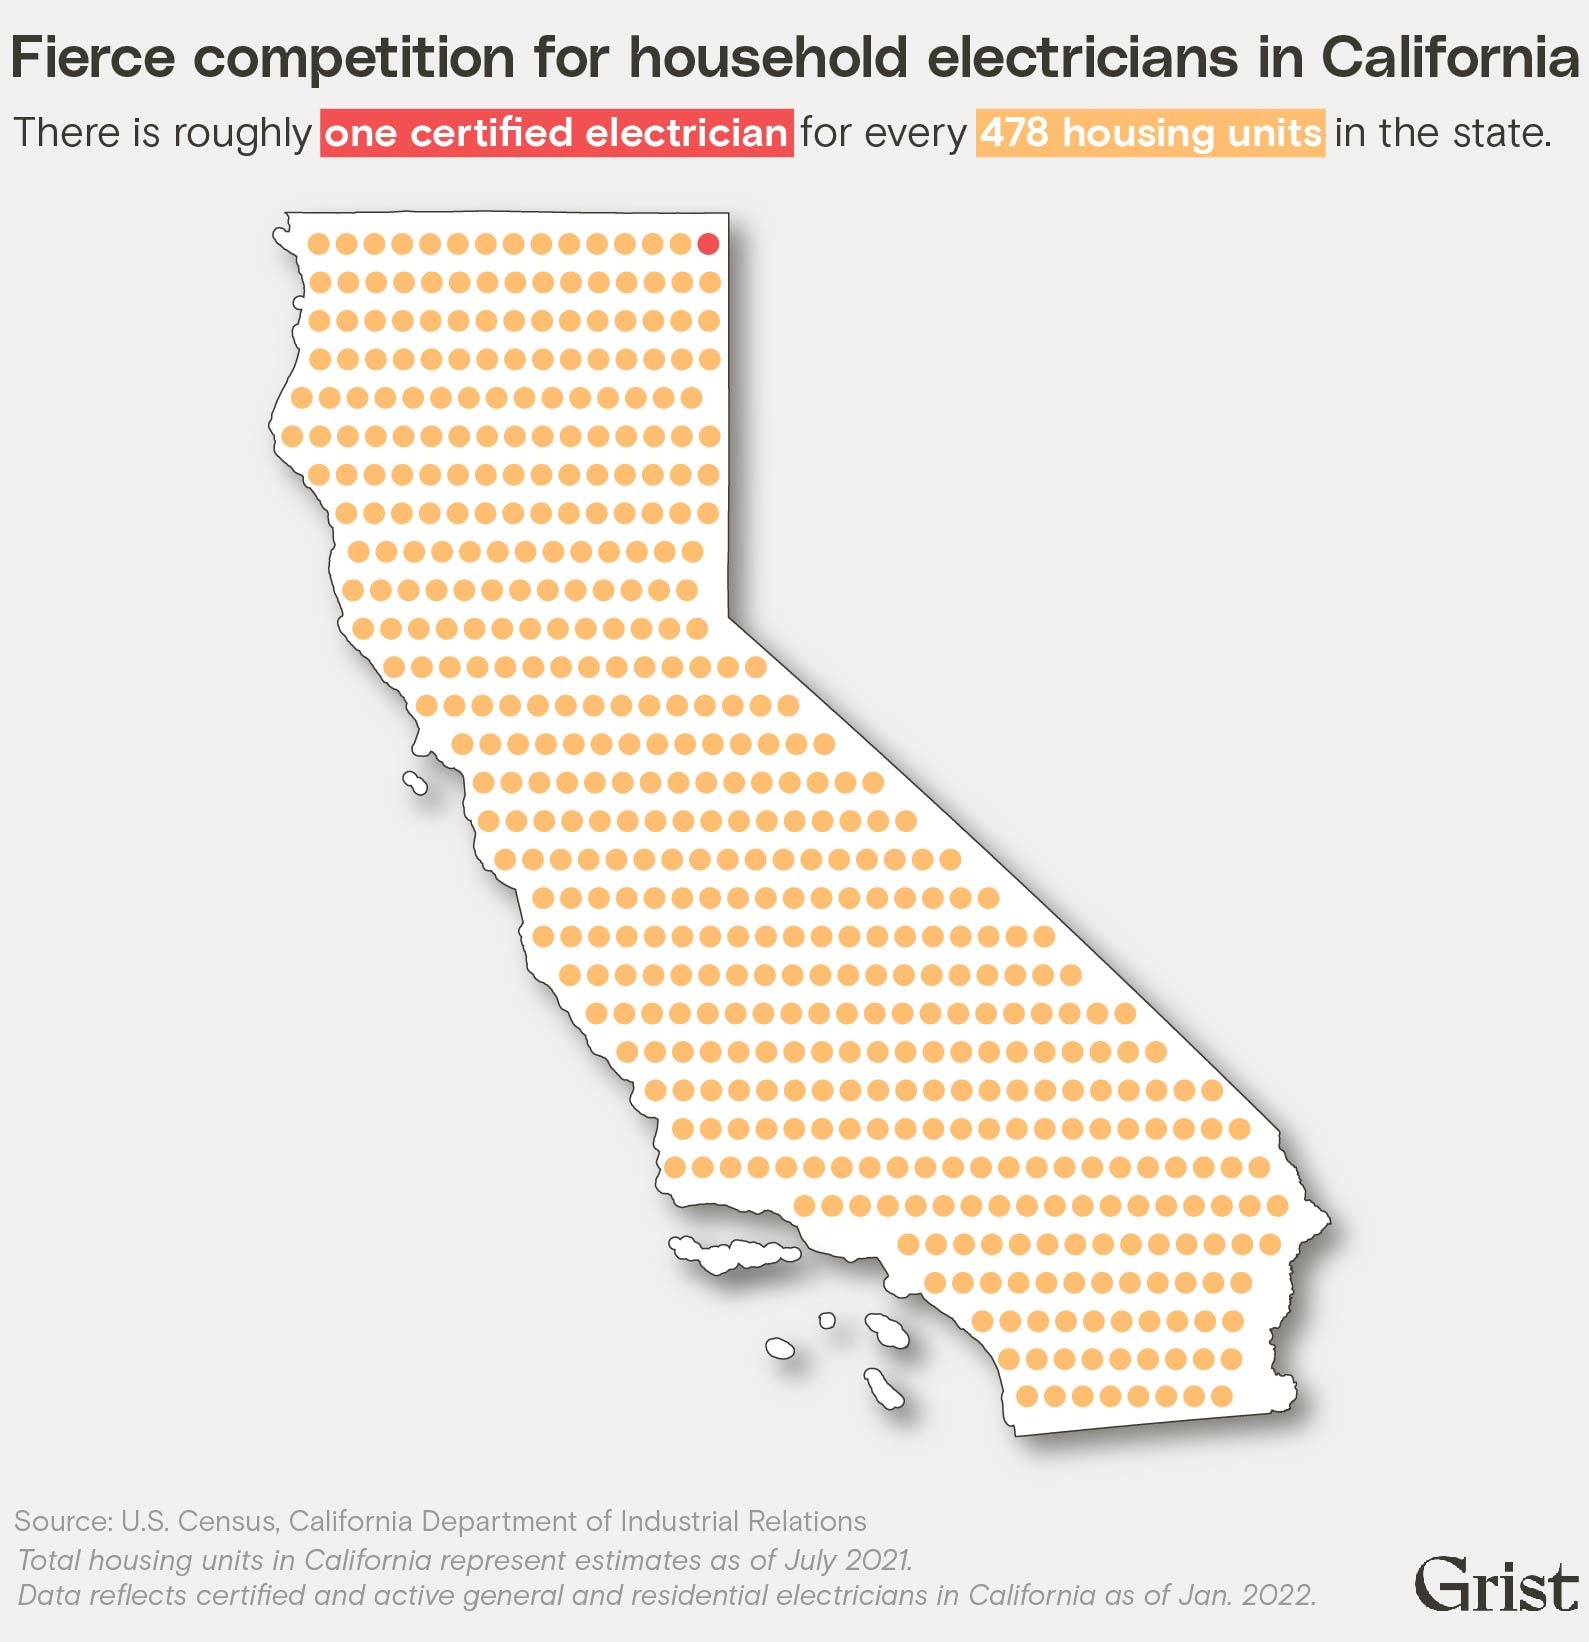 Pictograph in shape of California shows roughly one certified electrician qualified to work on households per 478 housing units in the state.